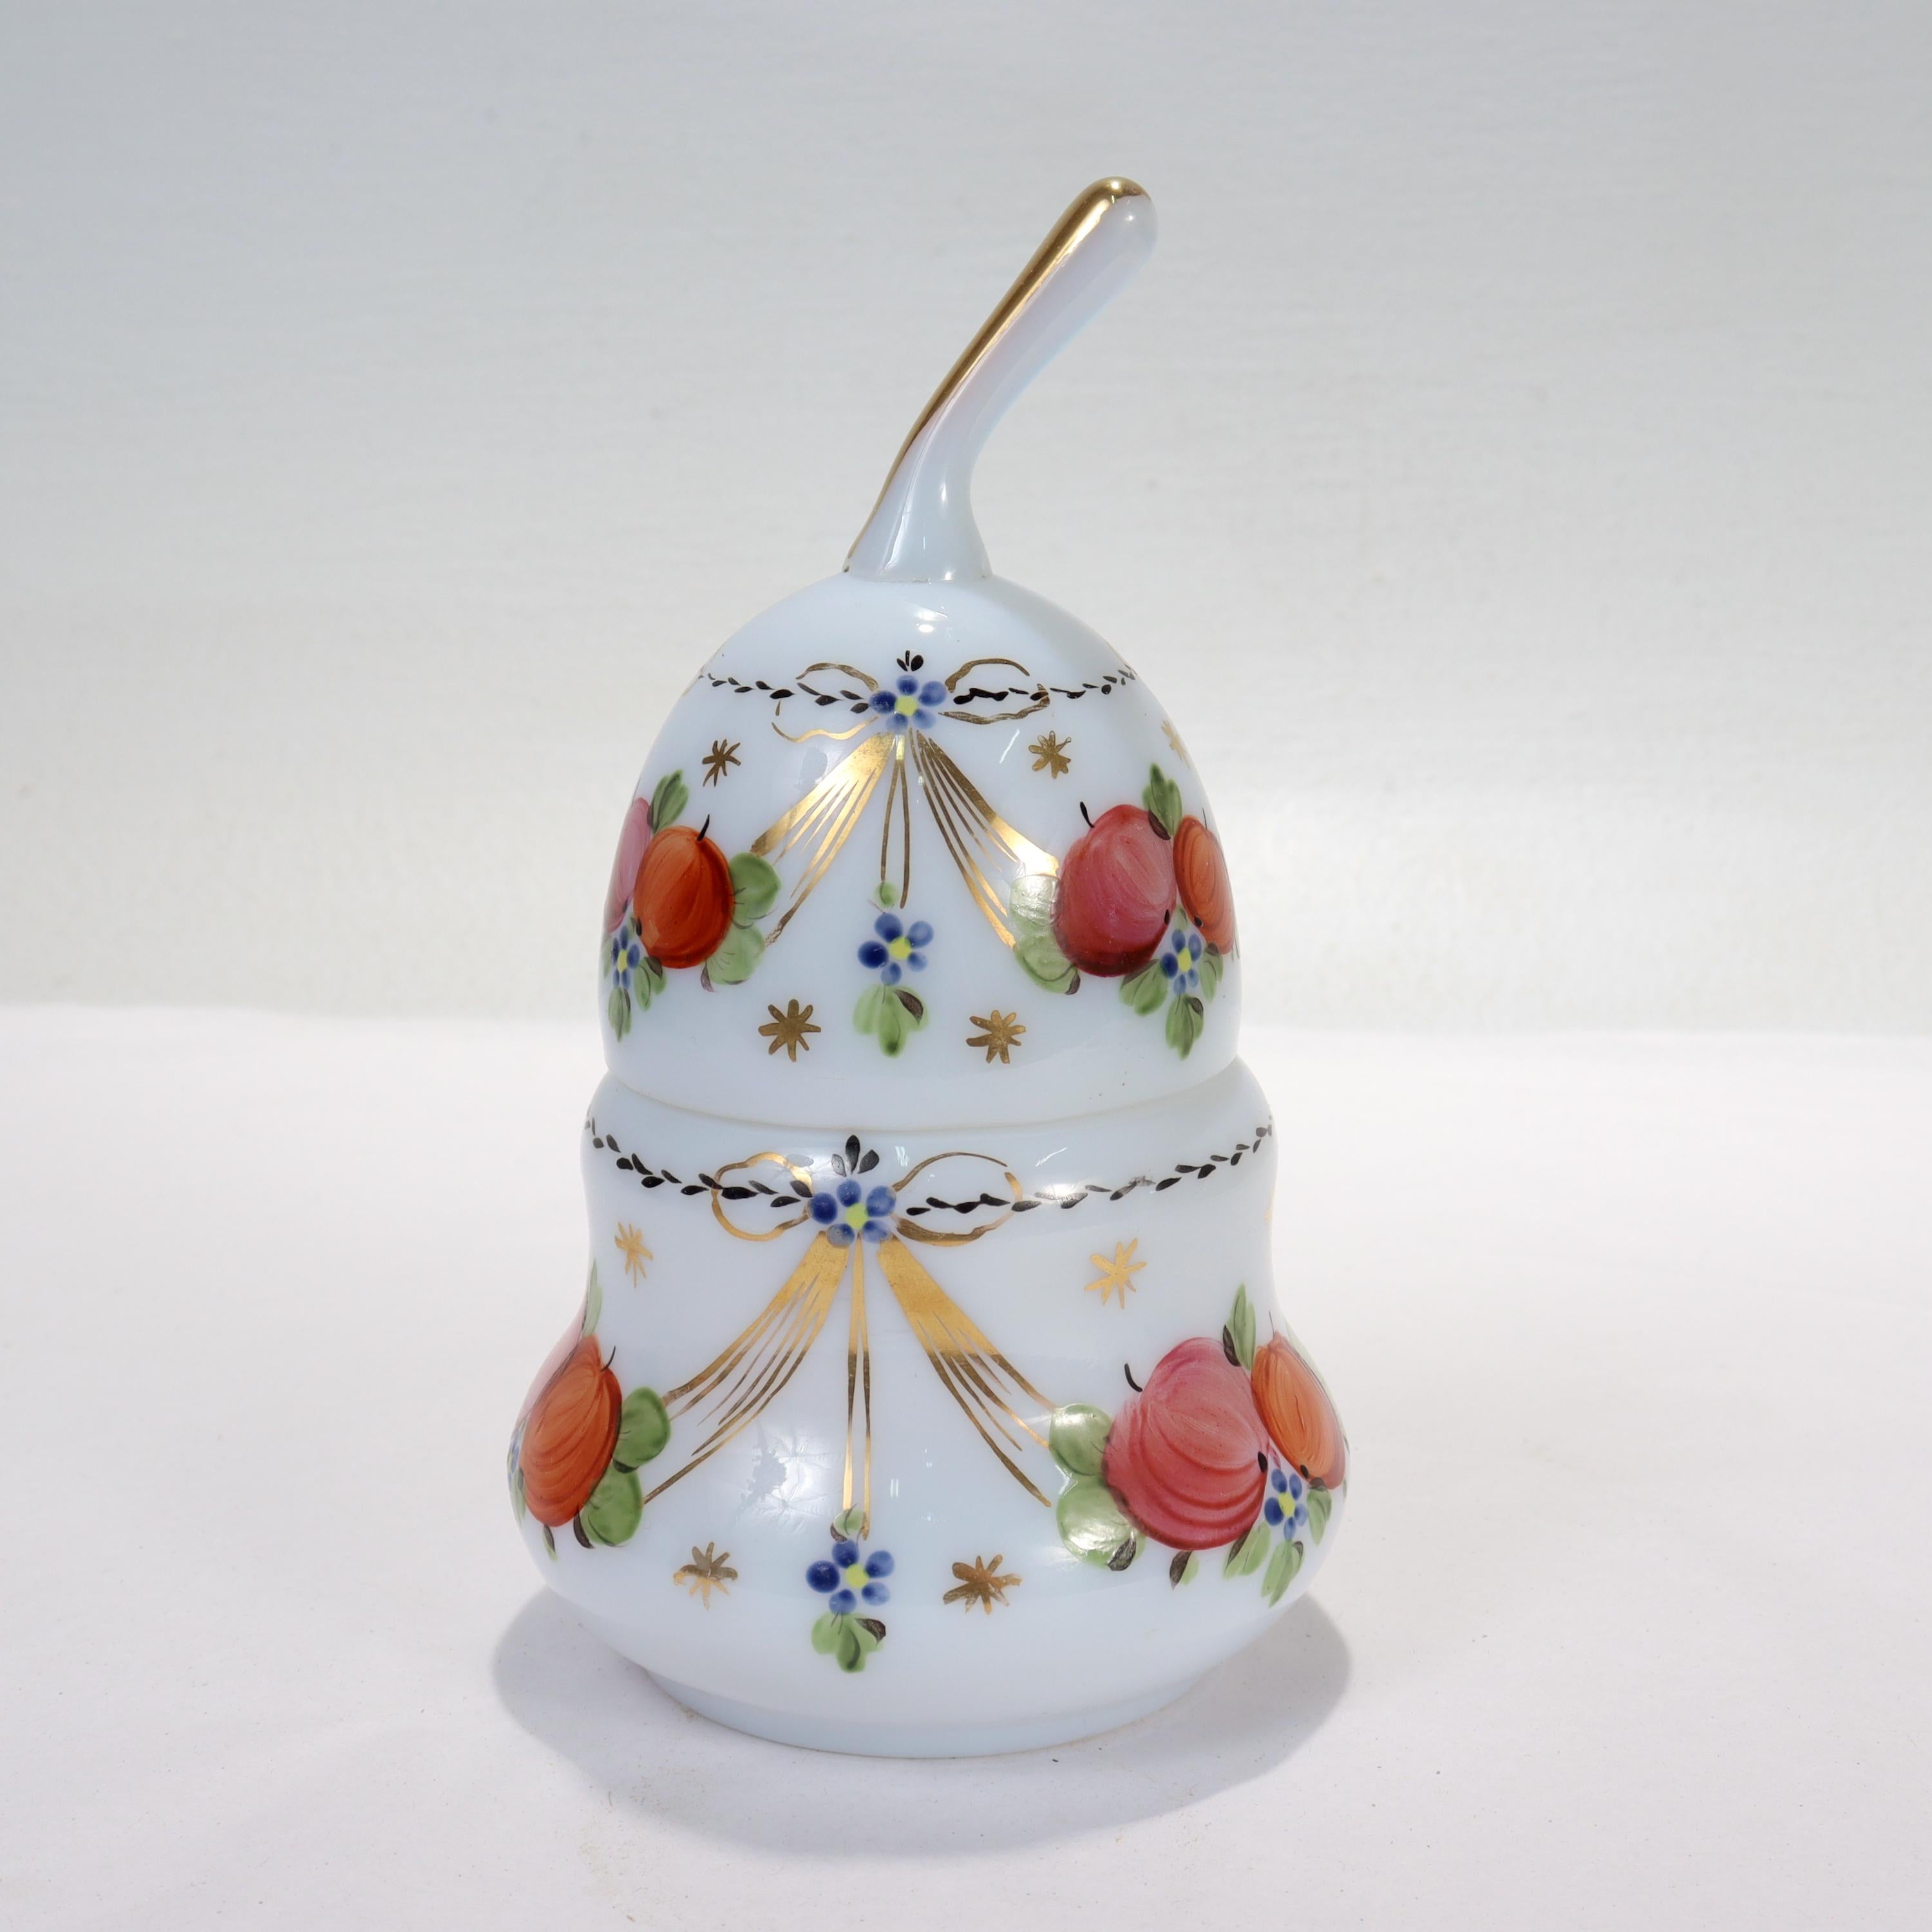 A fine opaline (likely French) glass box.

In the stylized form of a pear.

The white opalescent glass body and lid both have handpainted fruit and floral decoration & rich gilding throughout. 

Simply a wonderful dresser box!

Date:
Early